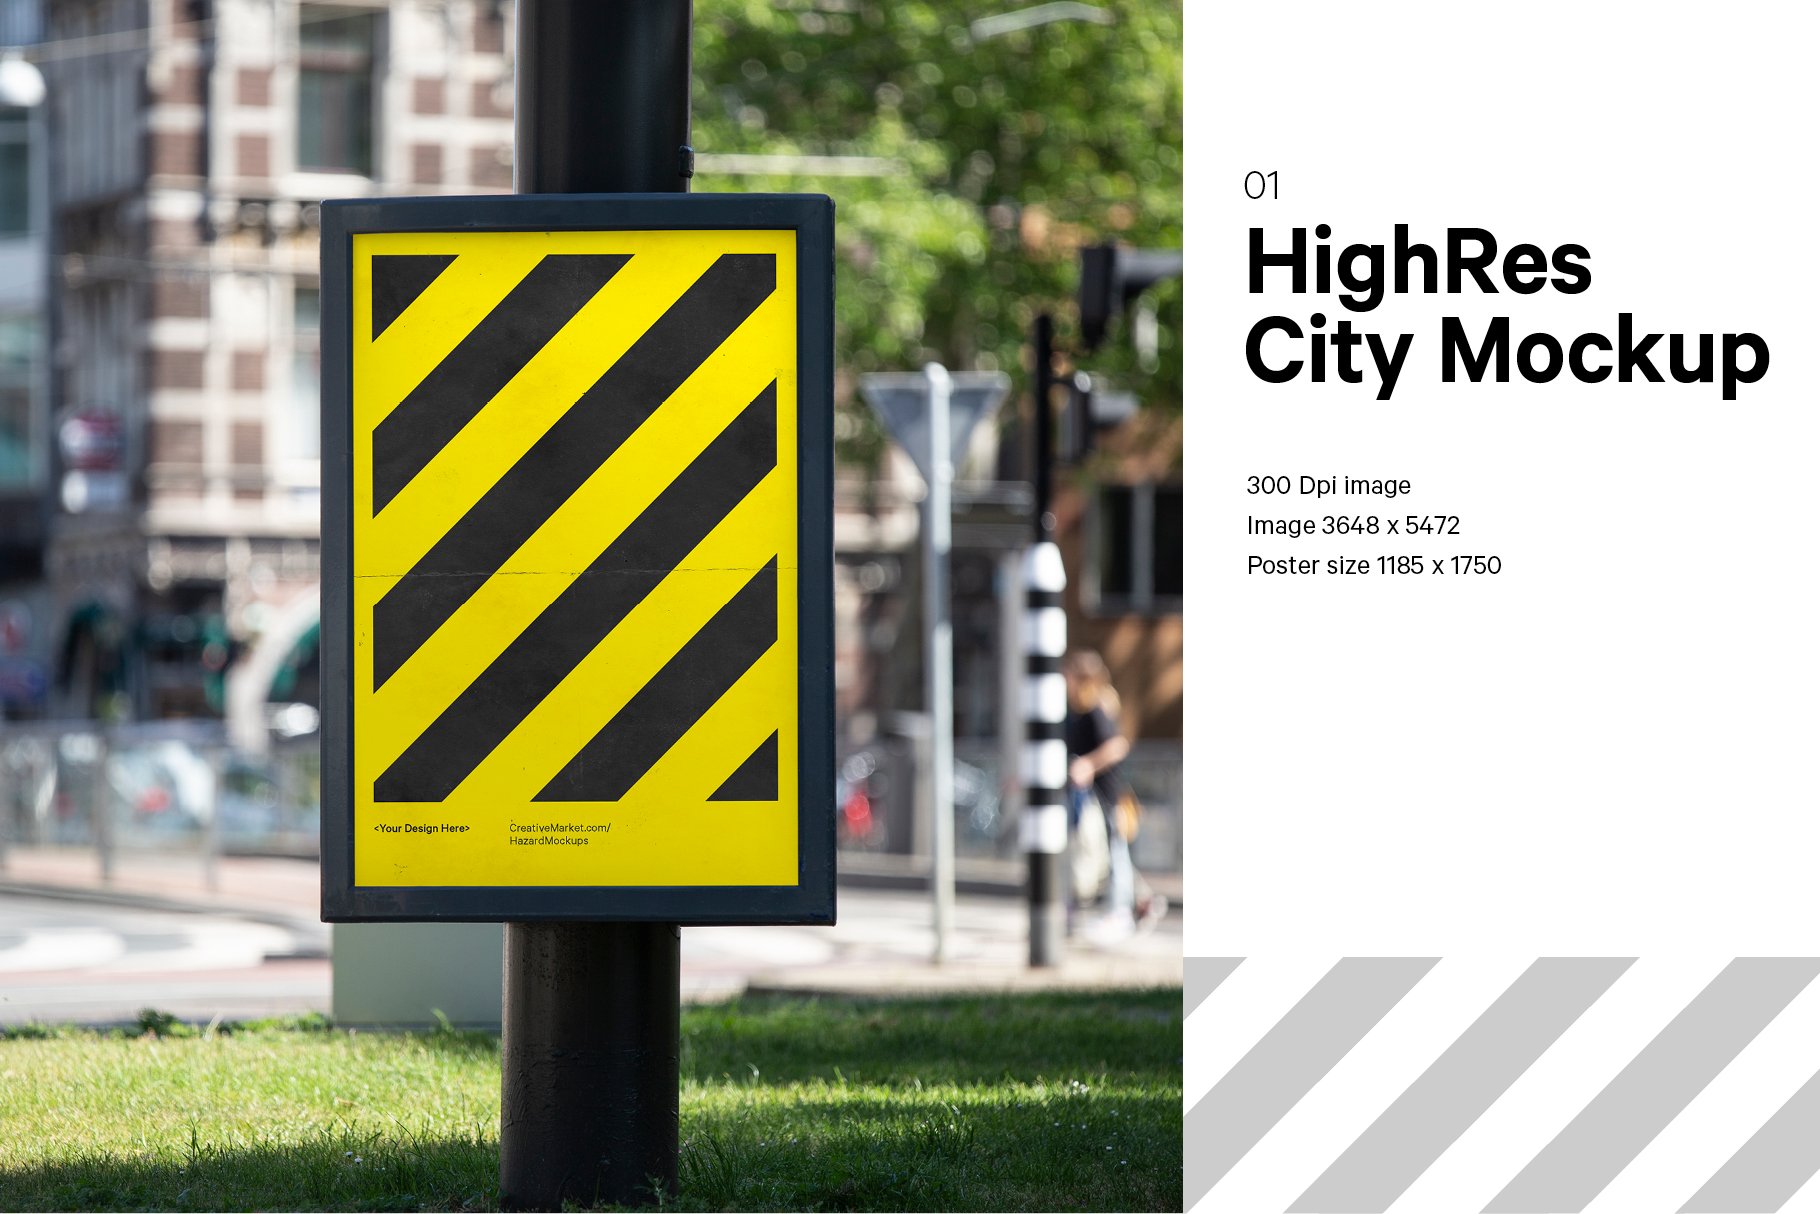 City Poster Mockup cover image.